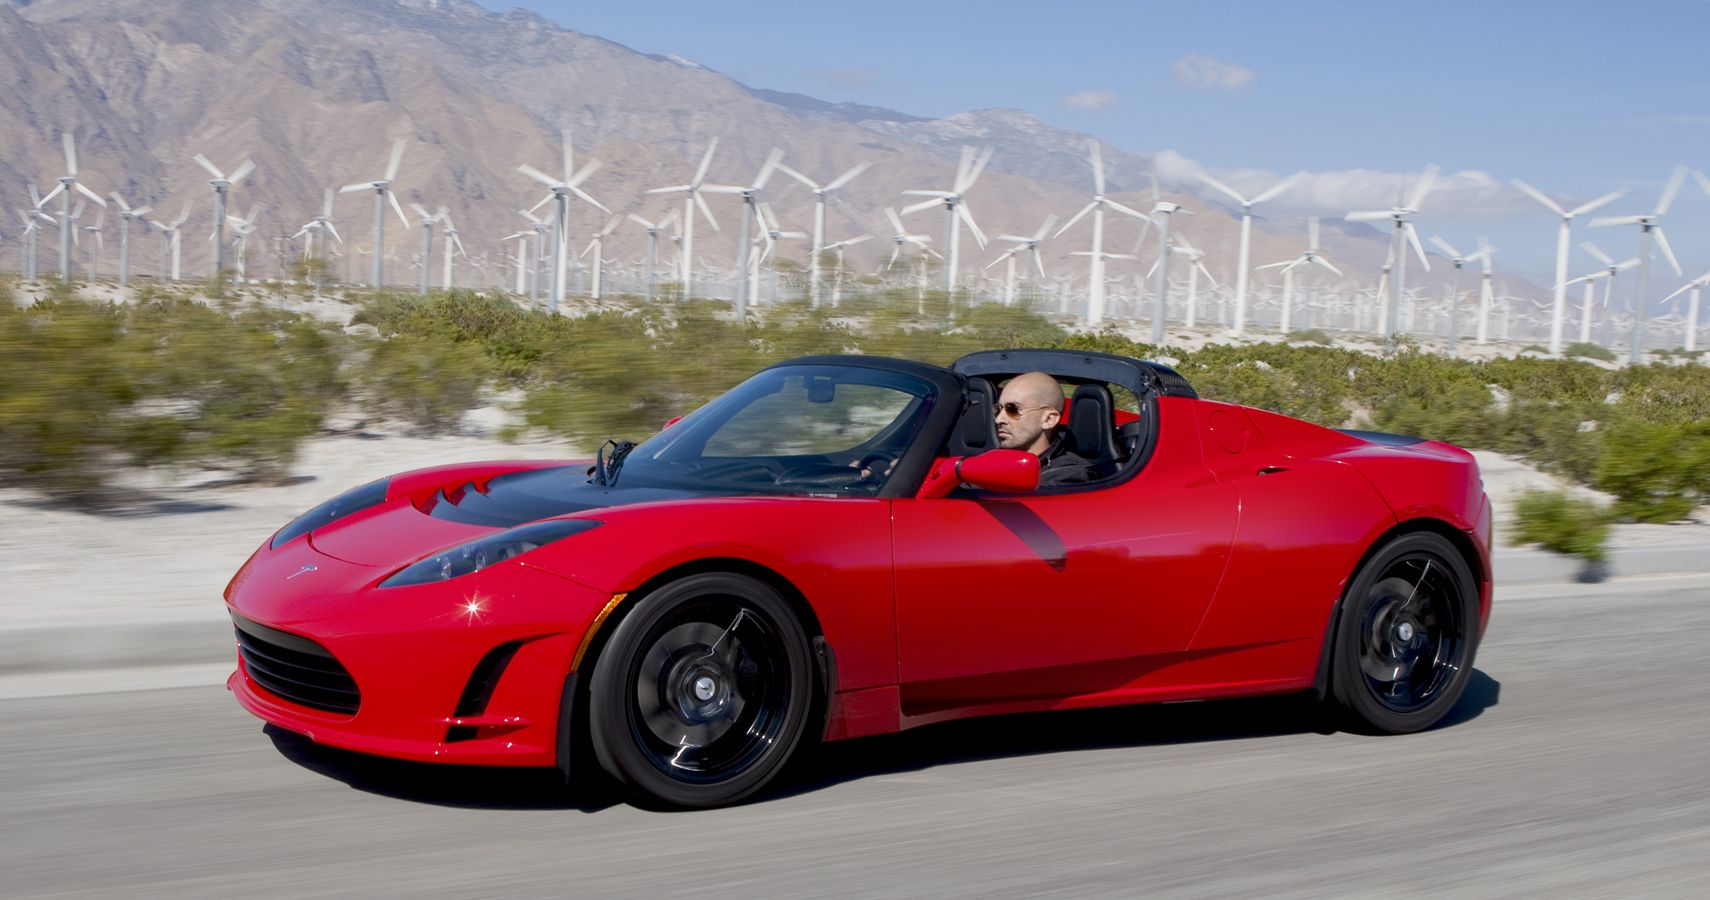 When The Tesla Roadster Came In 2008, It Came With Hypercar-Like Looks And Specs